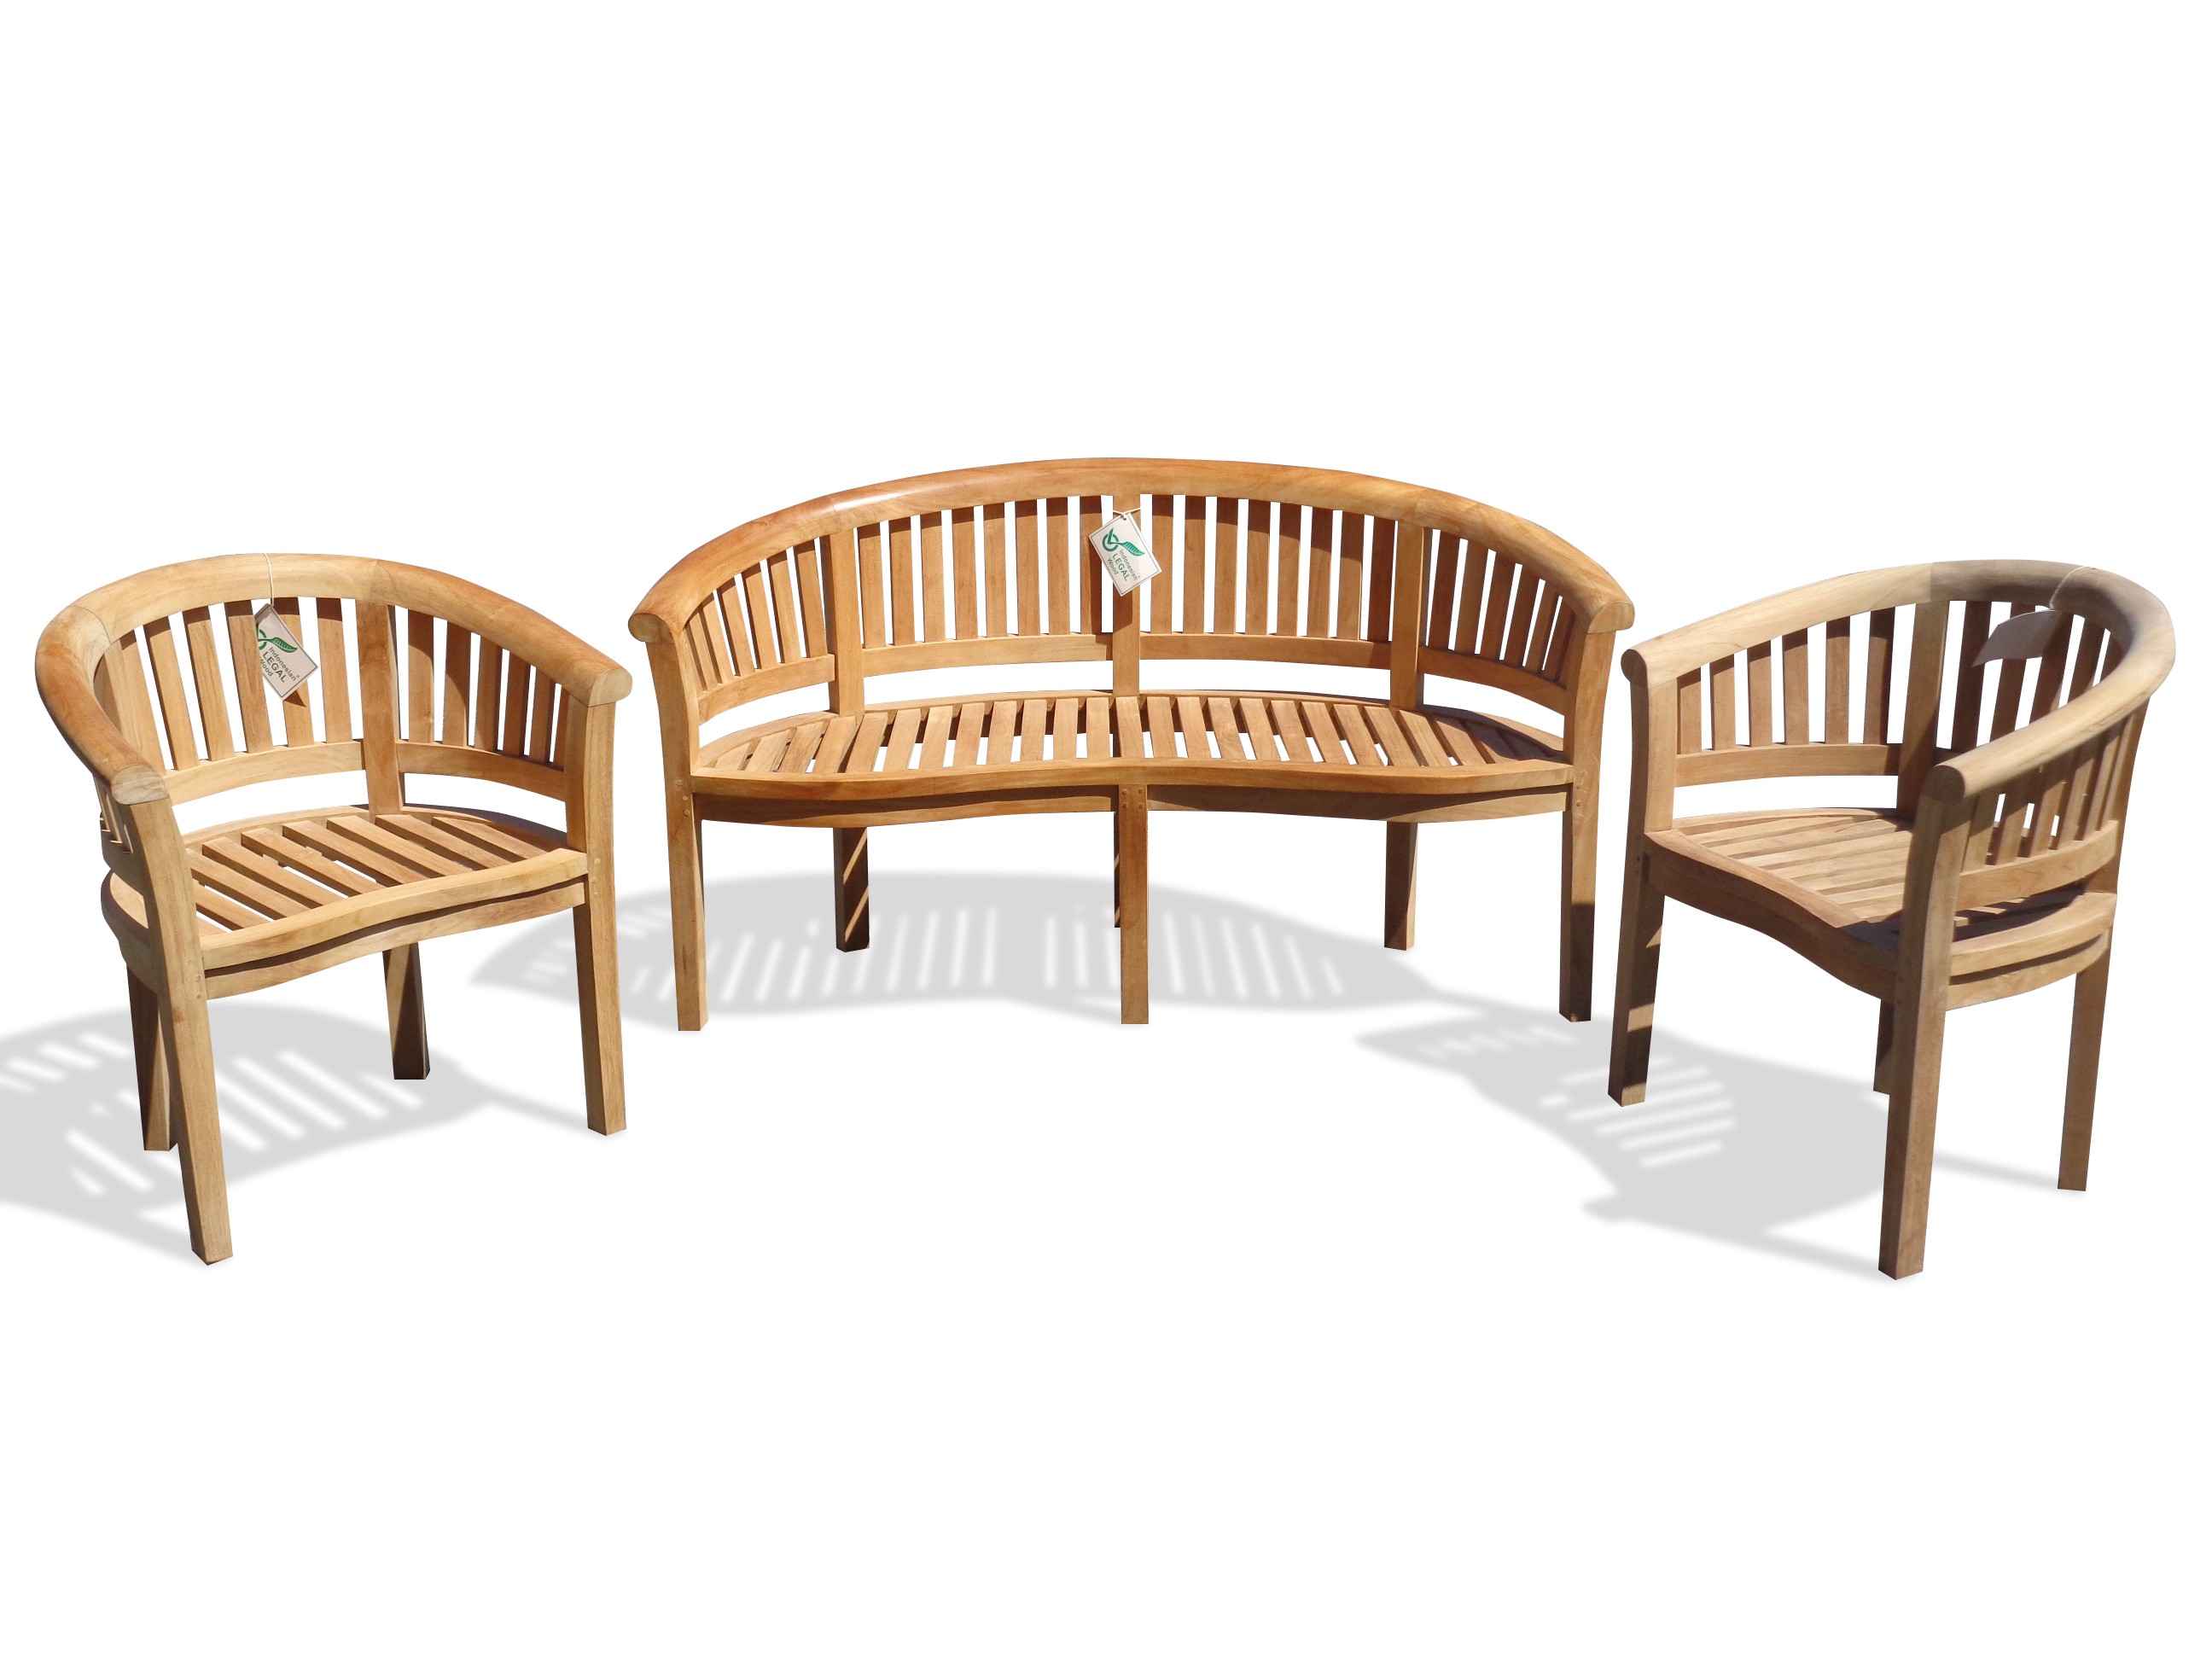 Kensington Teak 3 Pc Set, Curved 3 Seater Bench And 2 Armchairs